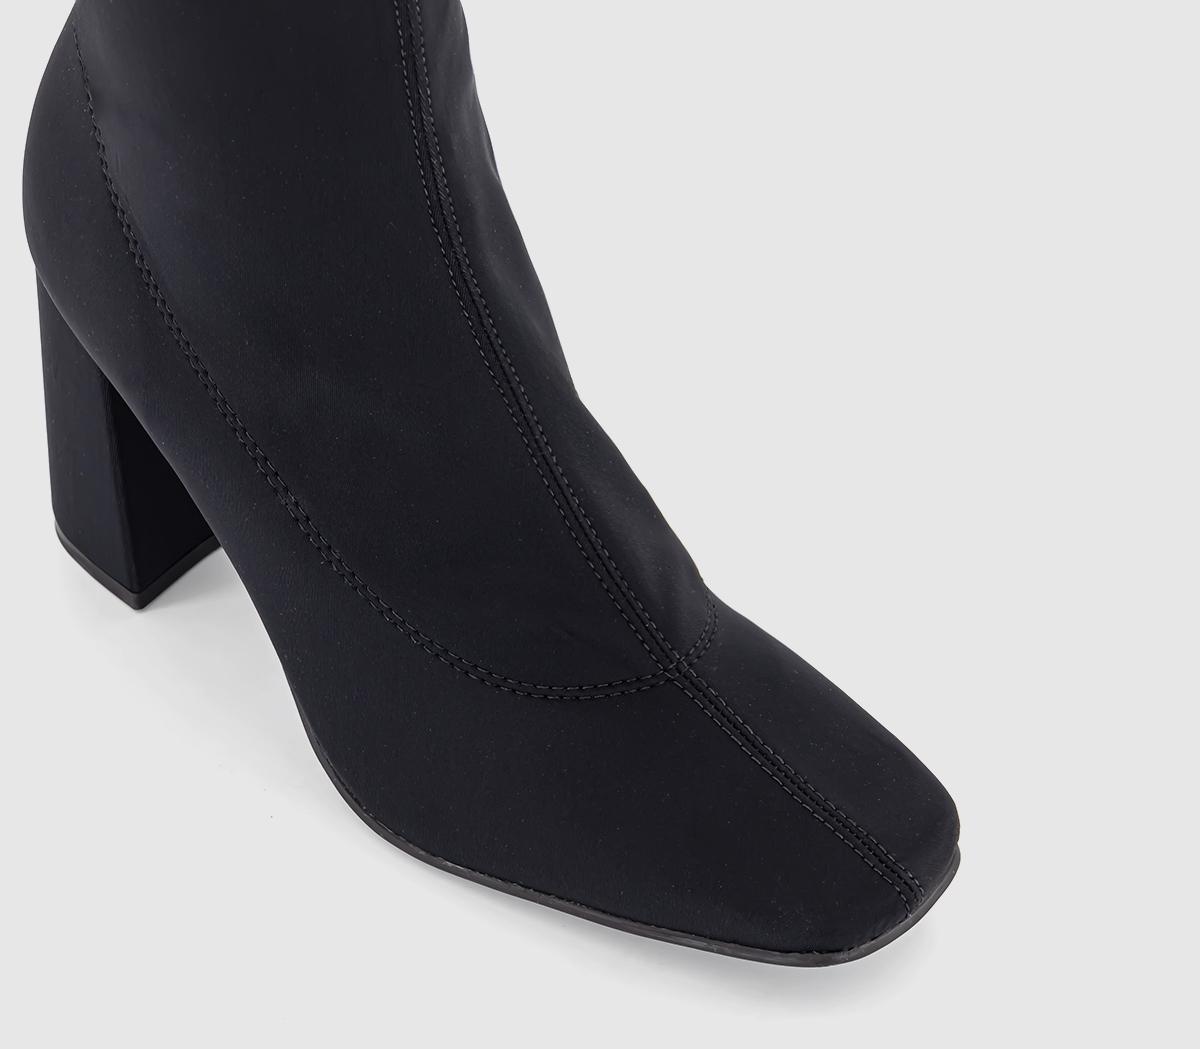 OFFICE Activate Heeled Sock Boots Black Textile - Women's Ankle Boots